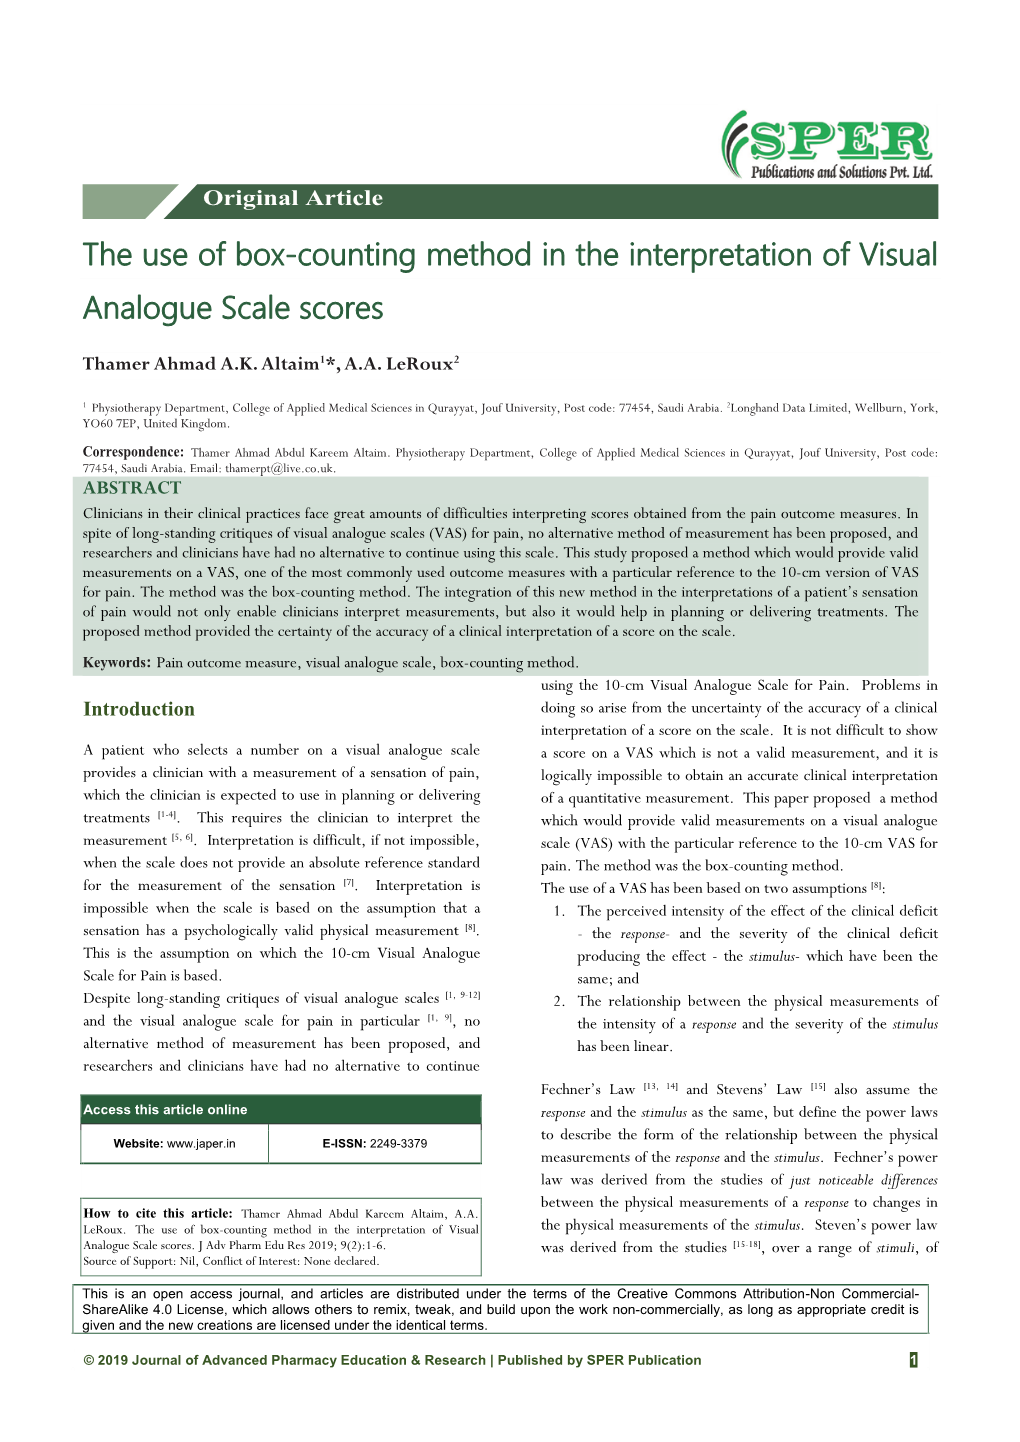 The Use of Box-Counting Method in the Interpretation of Visual Analogue Scale Scores